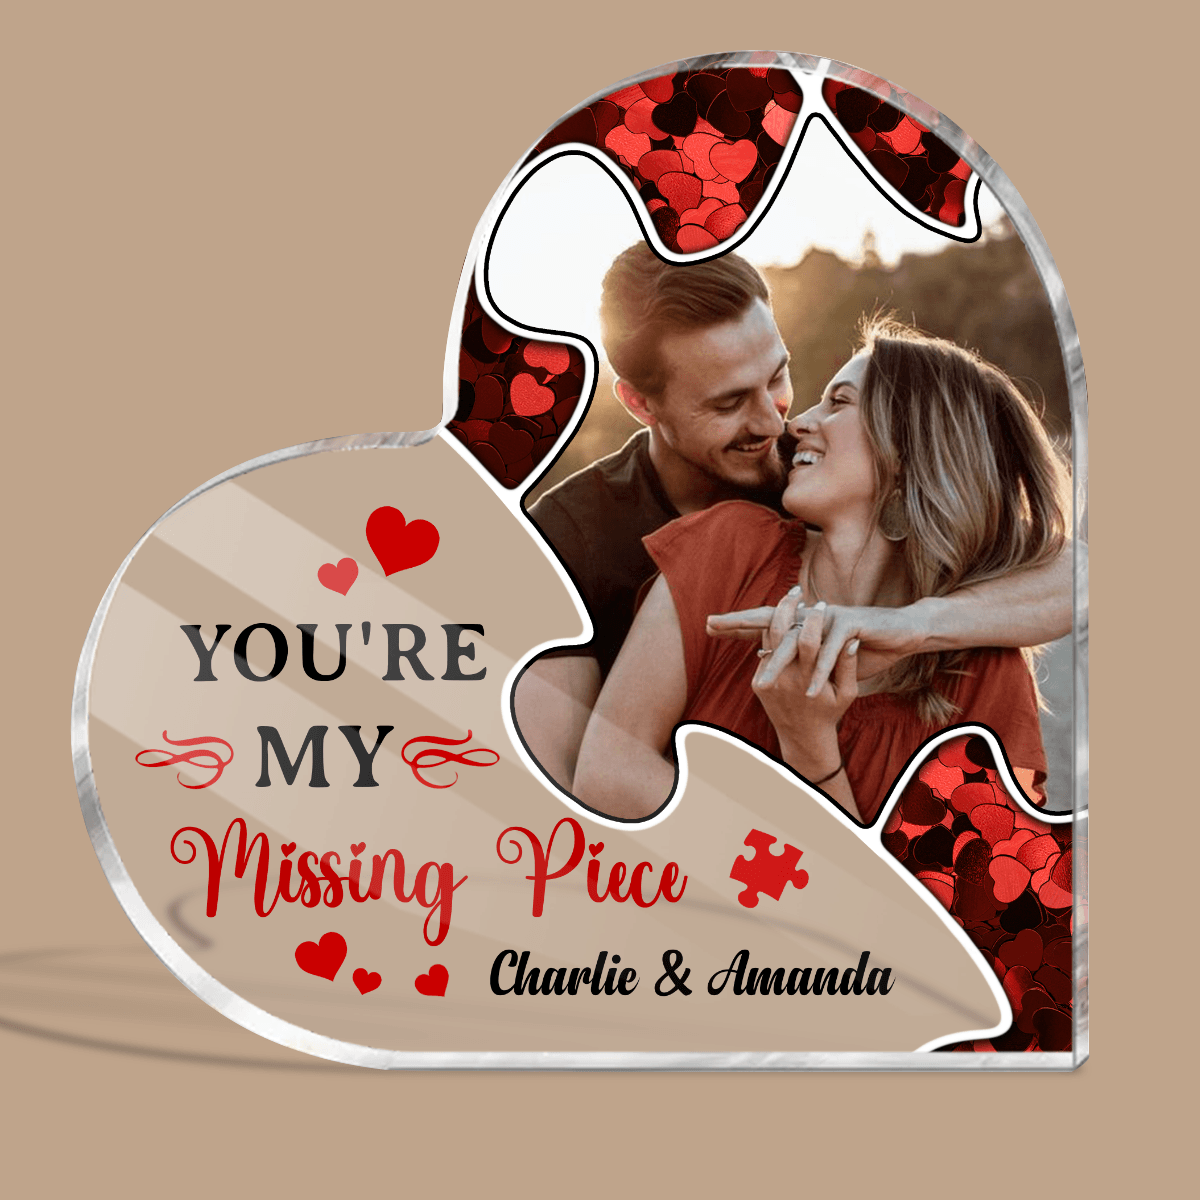 You Are My Missing Piece - Personalized Puzzle Heart Plaque - Gift for Couple